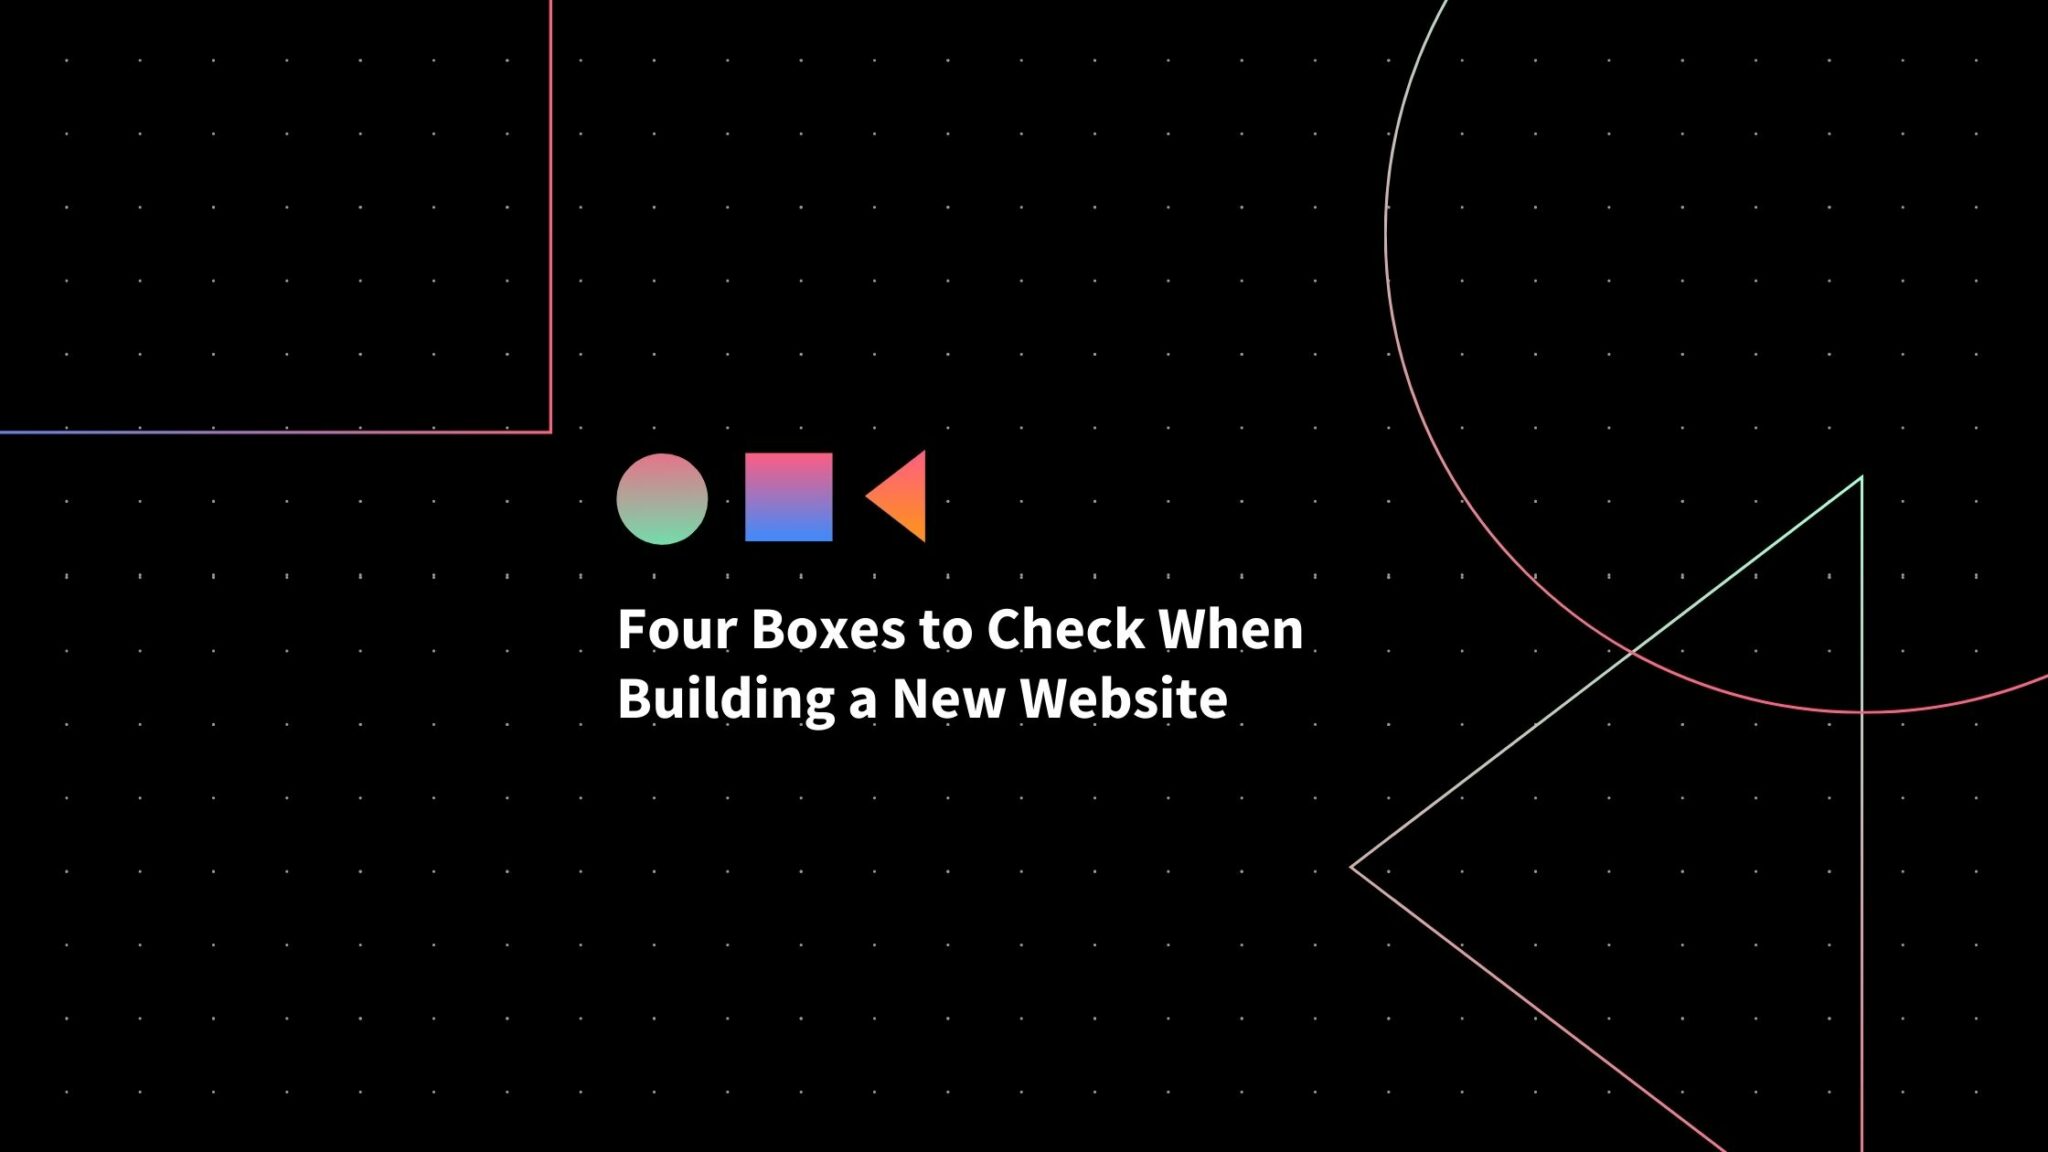 Four Boxes to Check When Building a New Website